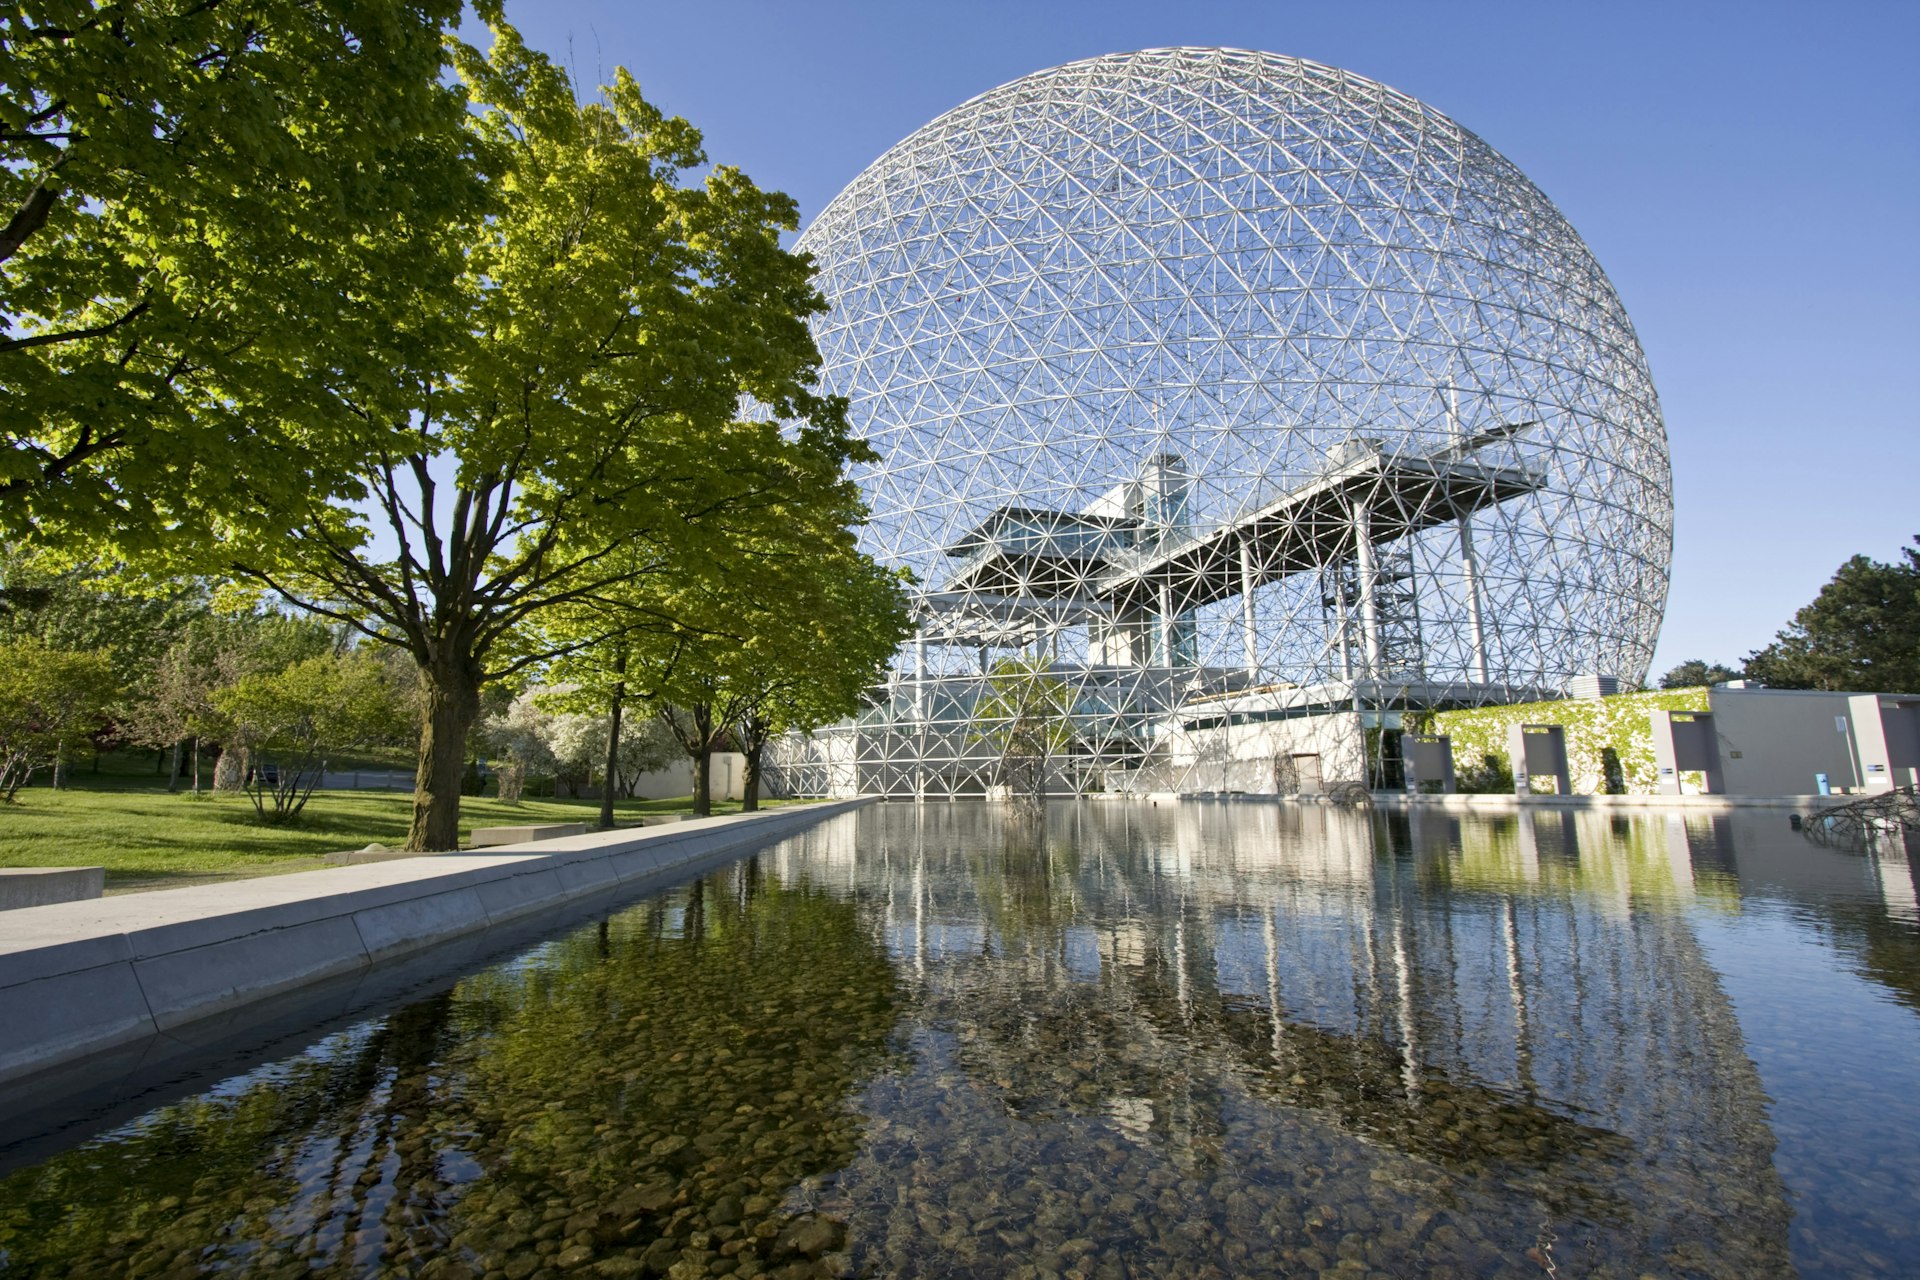 The exterior of the Biosphere Environmental Museum, Montreal which looks like a giant golf ball